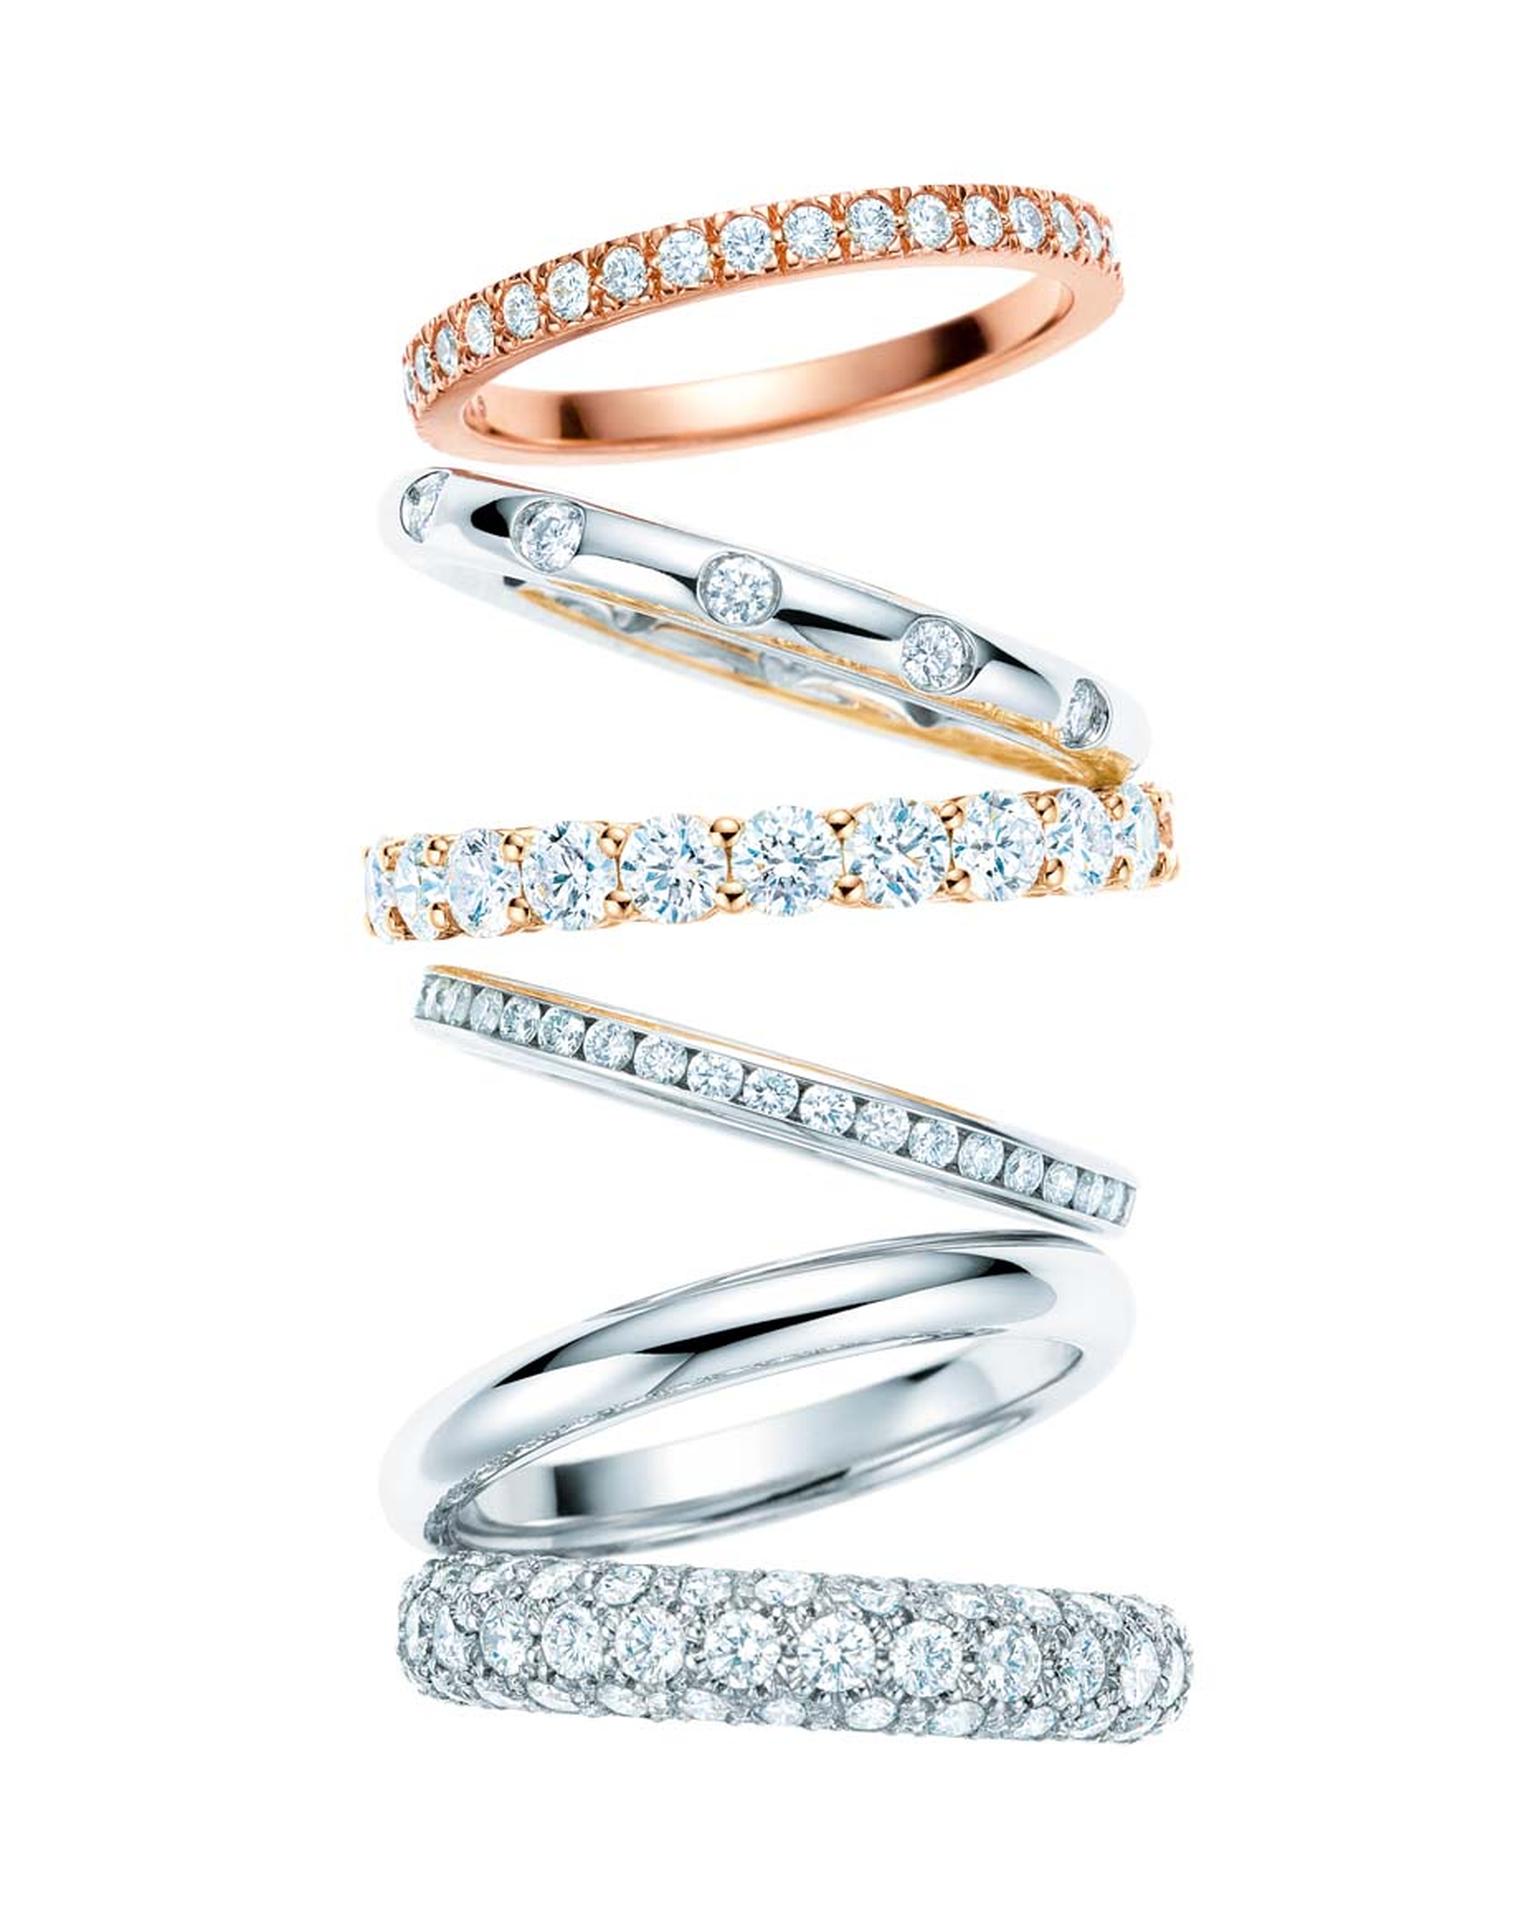 Tiffany & Co. has created timeless classics by creating many of its wedding bands in platinum, 18k yellow and rose gold, including the Novo, Bezet and Etoile.